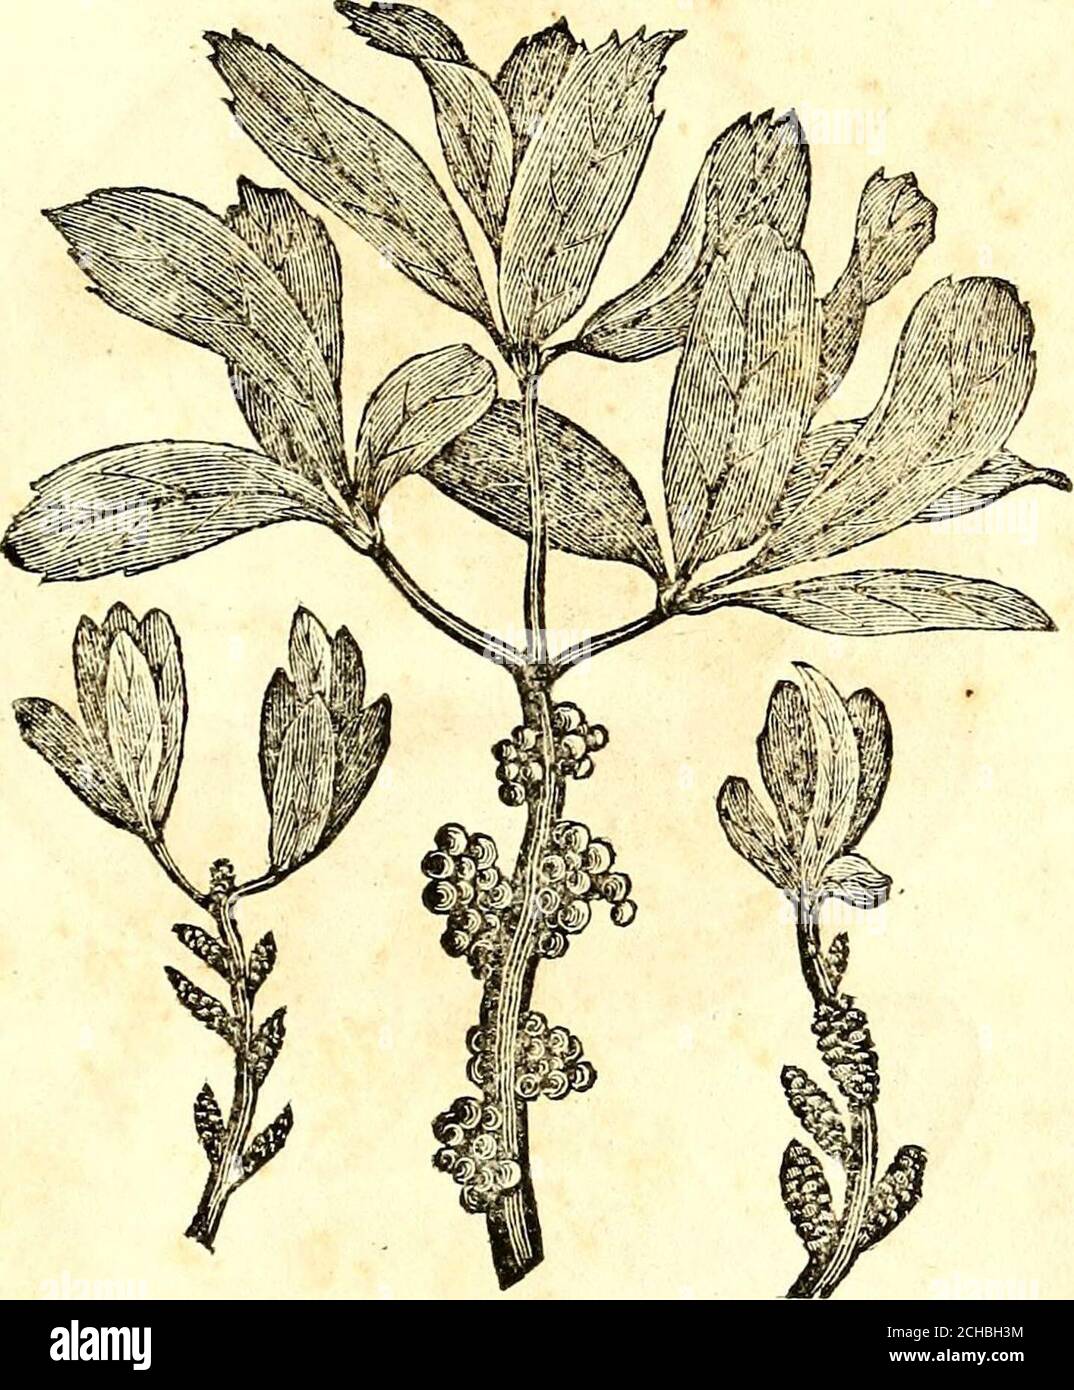 . An improved system of botanic medicine; founded upon correct physiological principles; embracing a concise view of anatomy and physiology; together with an illustration of the new theory of medicine . Lobelia, Emetic herb, Emetic weed, Indian Tobacco, Eyebright, Puke weed, &c. See page 334. MYRICA CERIFERA.. Candle Berry, Wax Myrtle, Sweet Gale, Wax Berry. See page 339. 59 NYMPHA ODOR ATA. Stock Photo